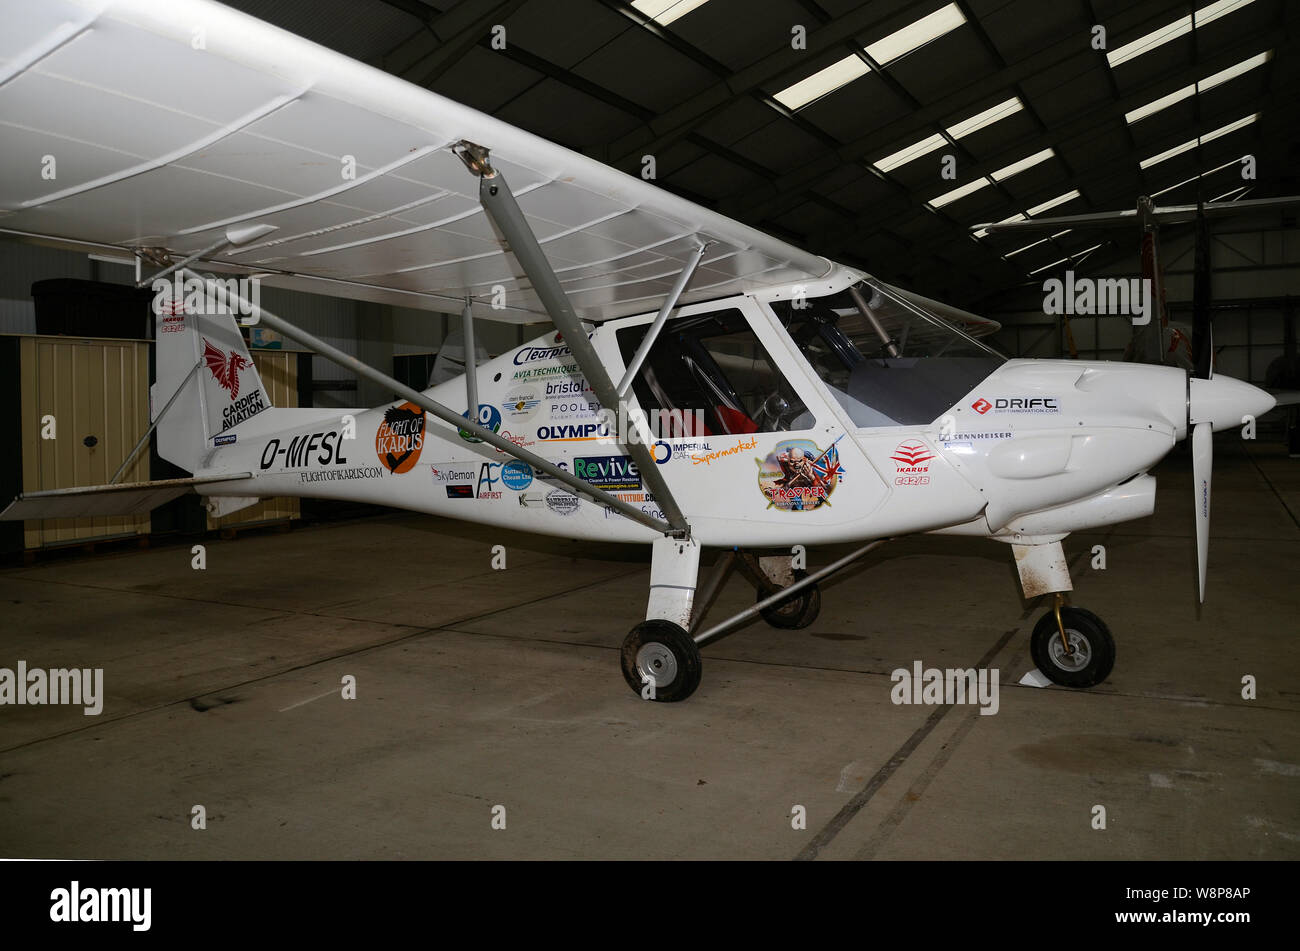 Ikarus C42 D-MFSL general aviation microlight aircraft, manufactured in Germany by Comco Ikarus. Flight of Ikarus record attempt aircraft with sponsor Stock Photo